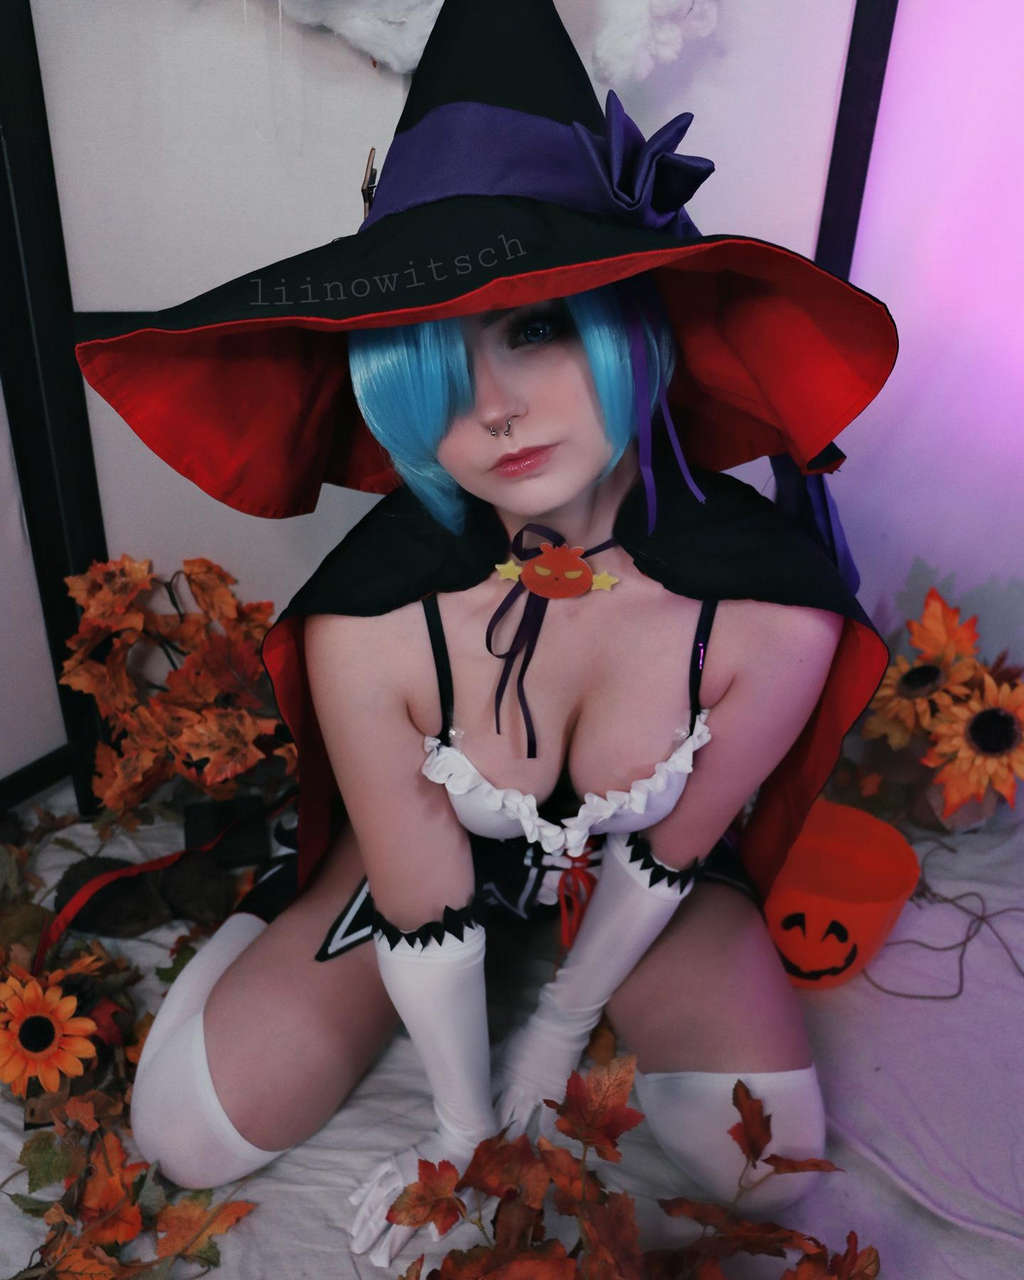 Spooky Rem By Liinowitsch 0